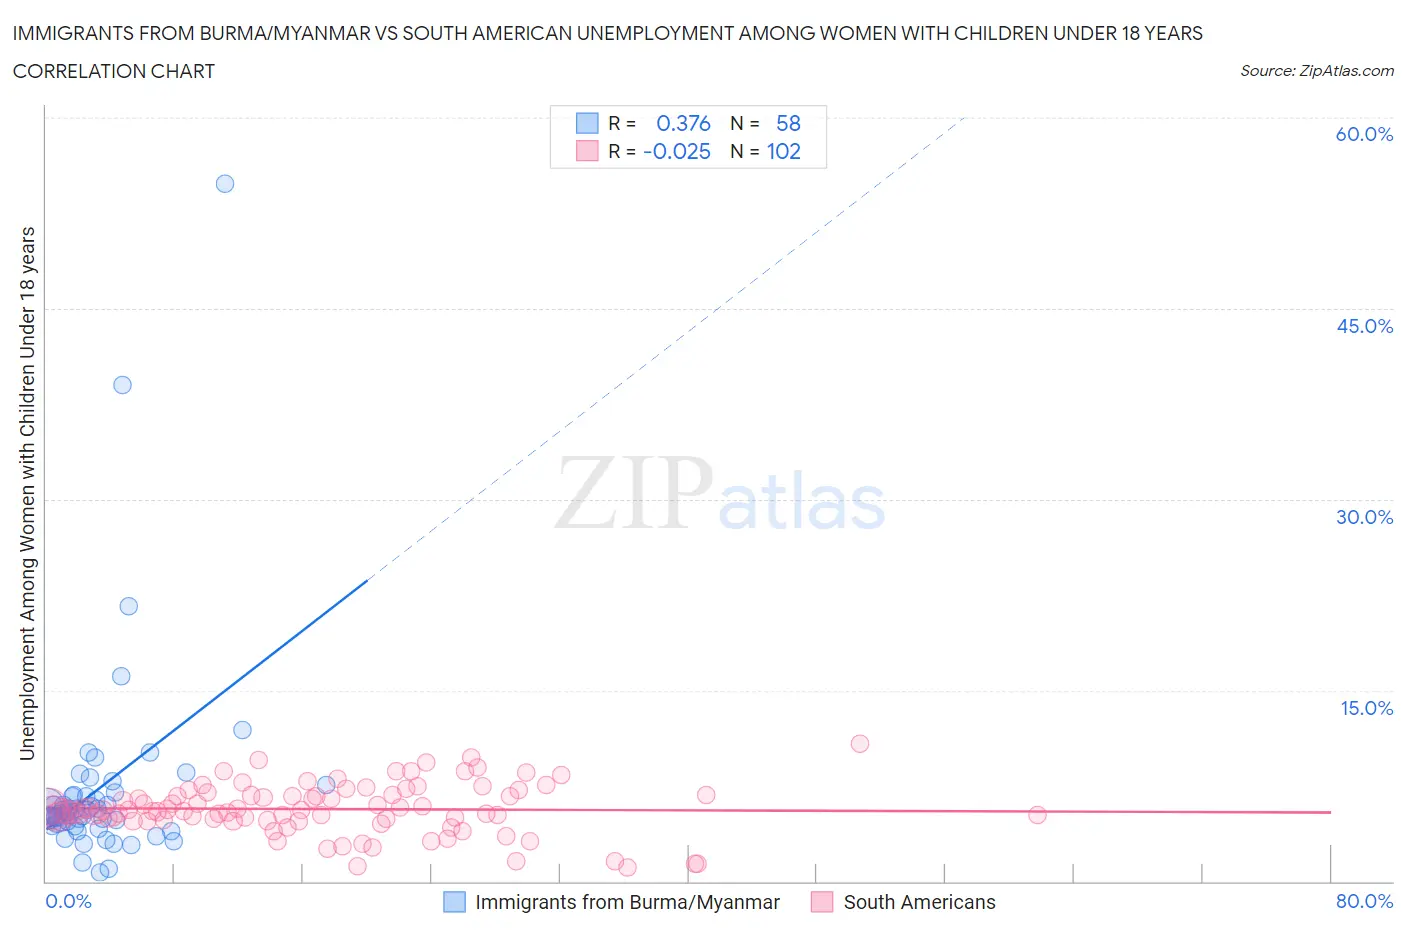 Immigrants from Burma/Myanmar vs South American Unemployment Among Women with Children Under 18 years